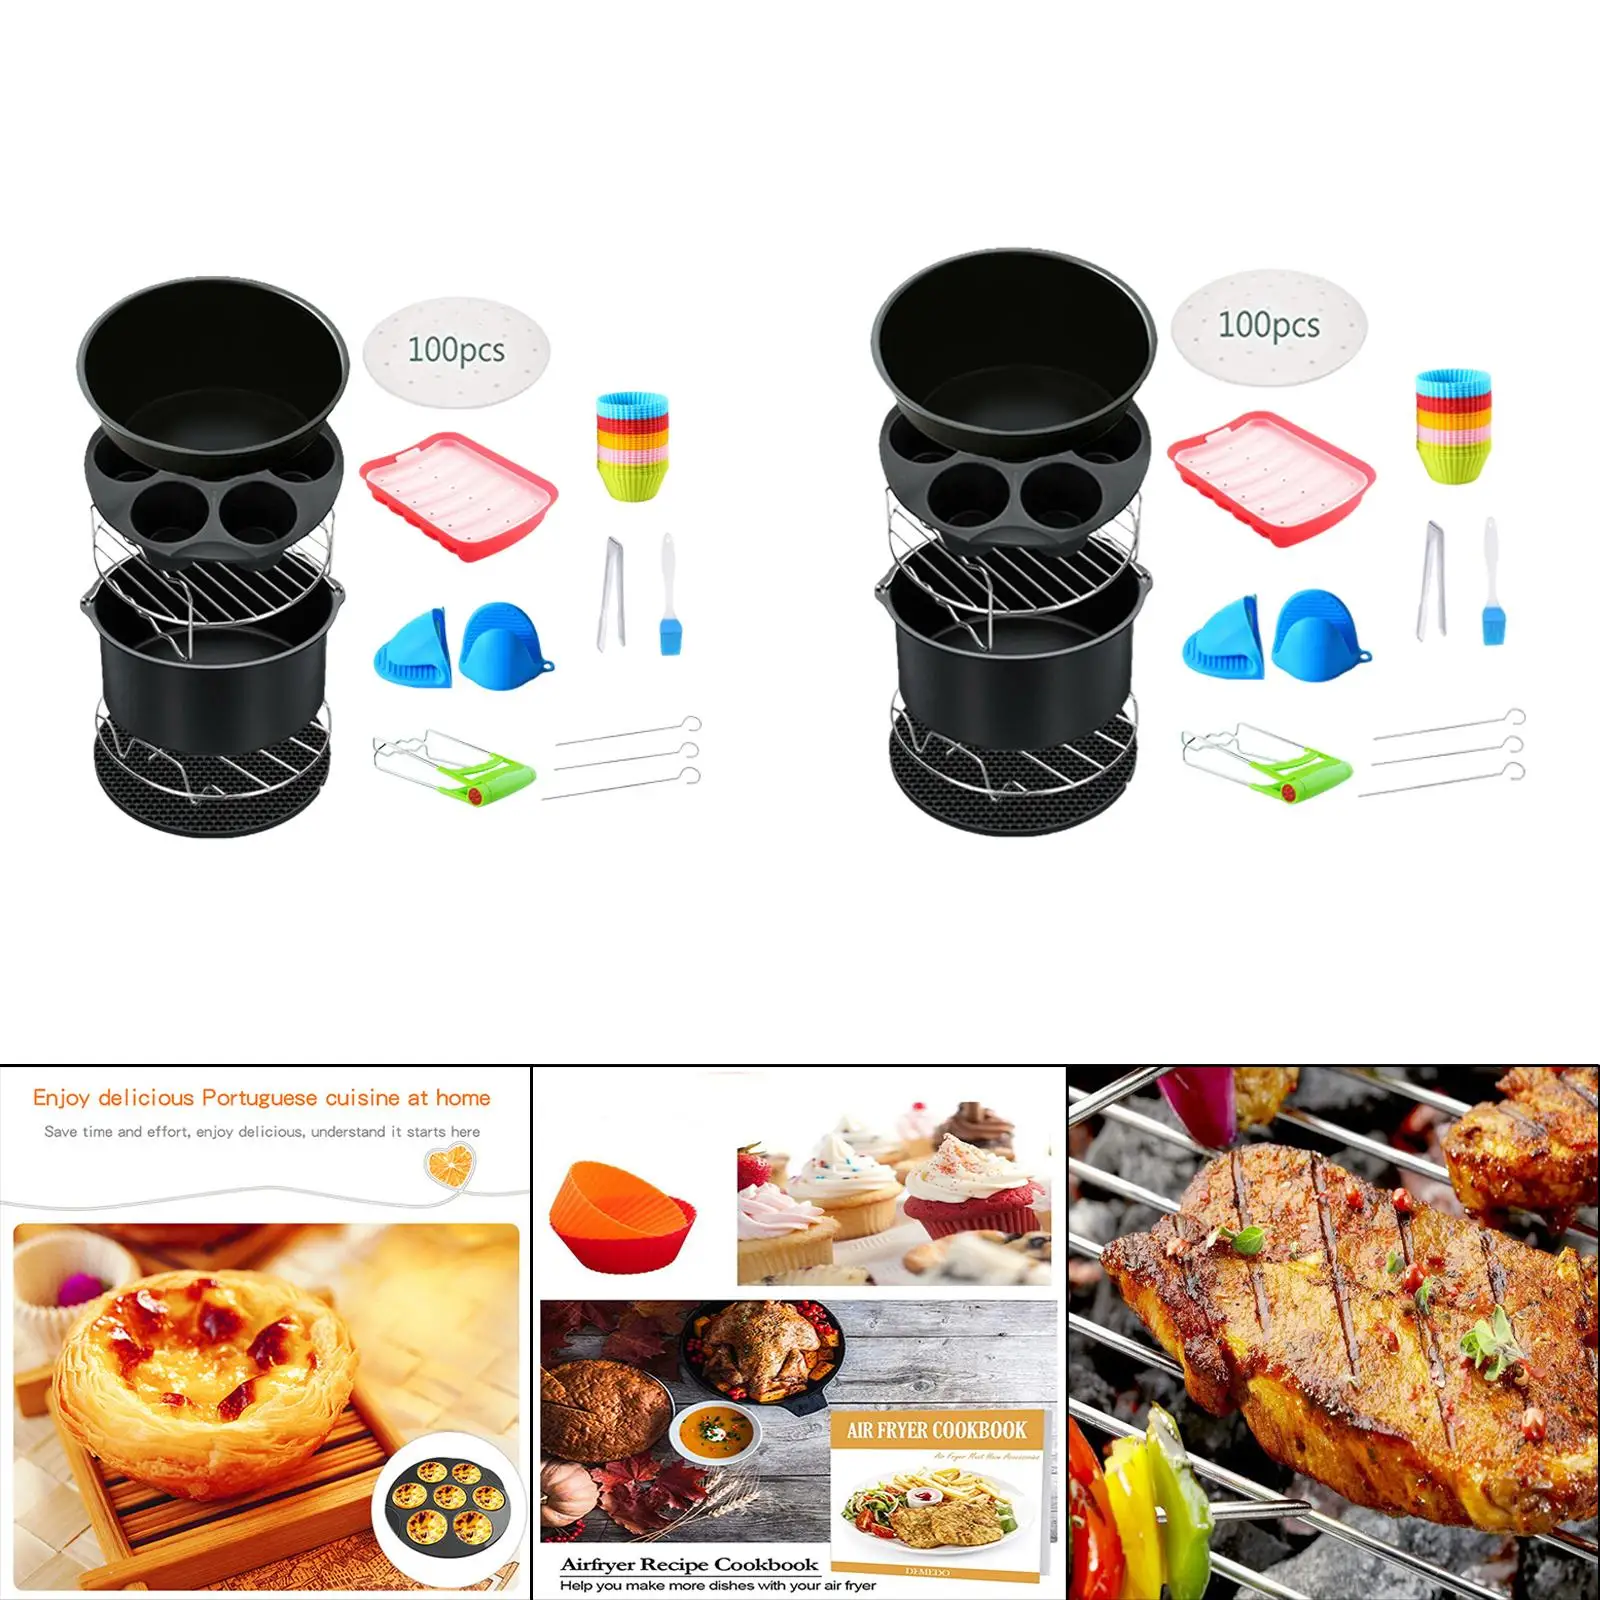 13Pcs Air Fryer Airfryer Accessories Kit Hot Dog Mould Skewer Rack for 4.5L-5.2L Capacity